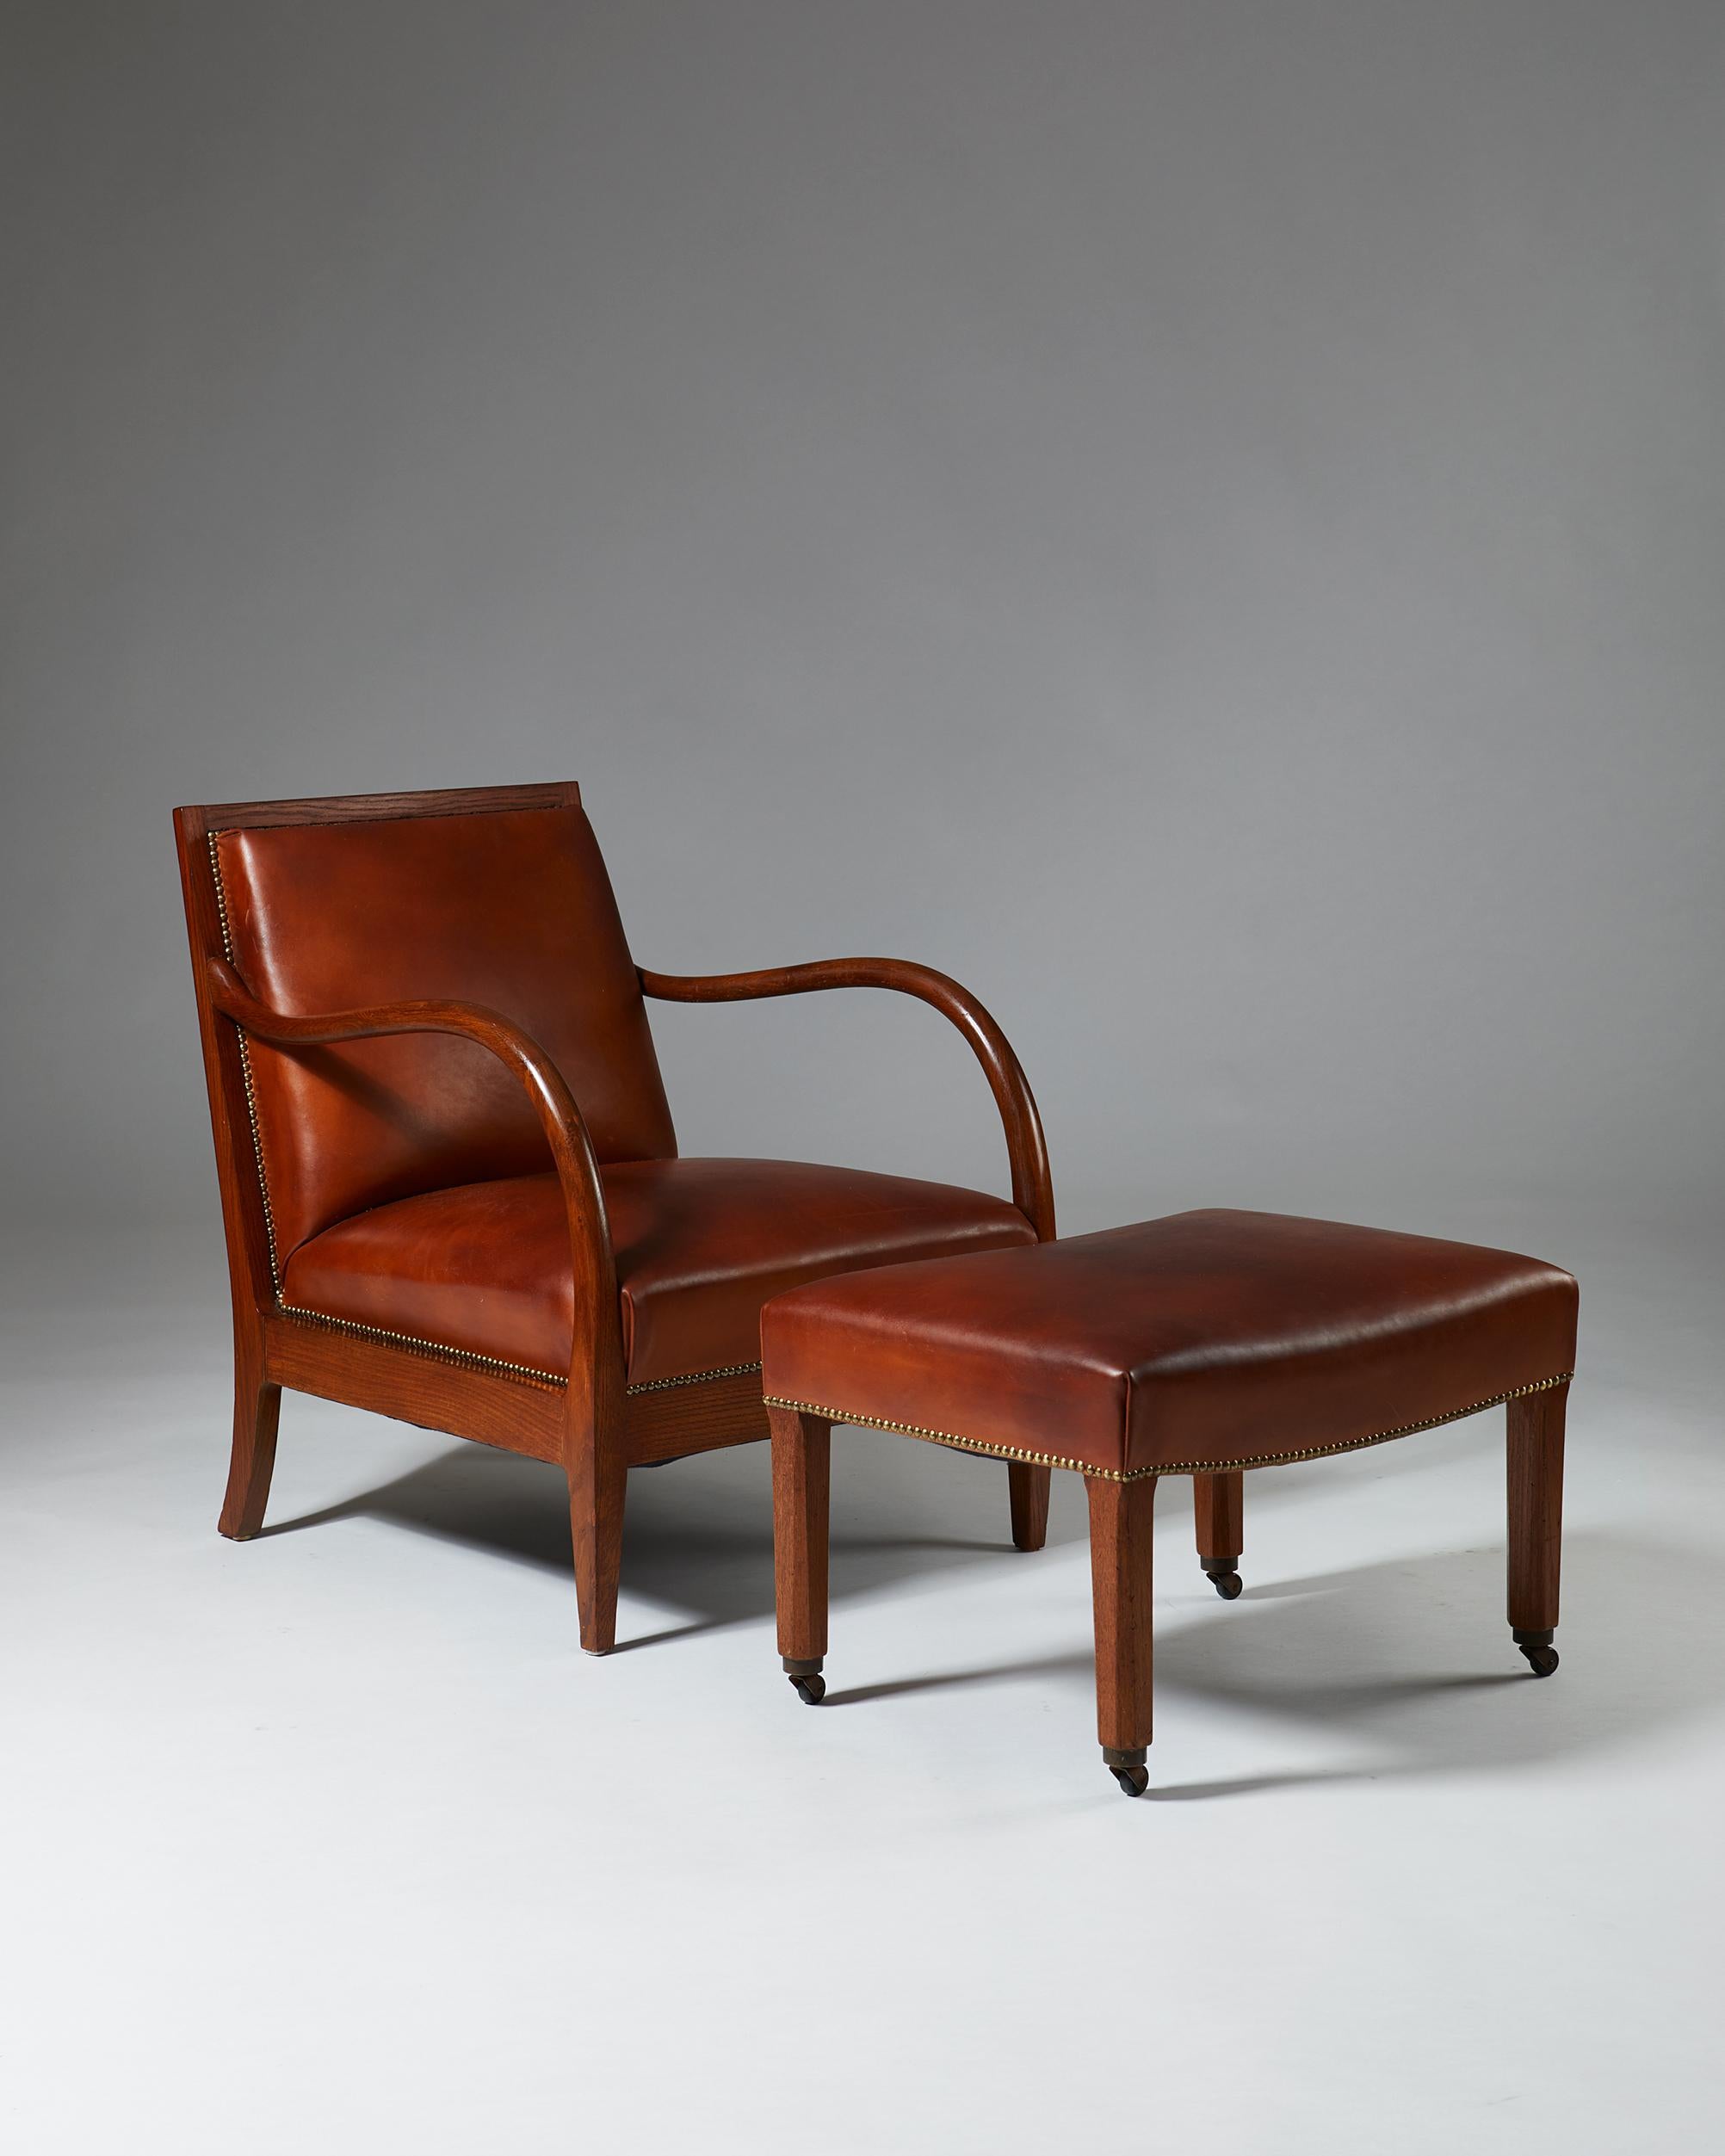 Oak, brass and leather.

Measures: Armchair
H 79.4 cm/ 31 1/2